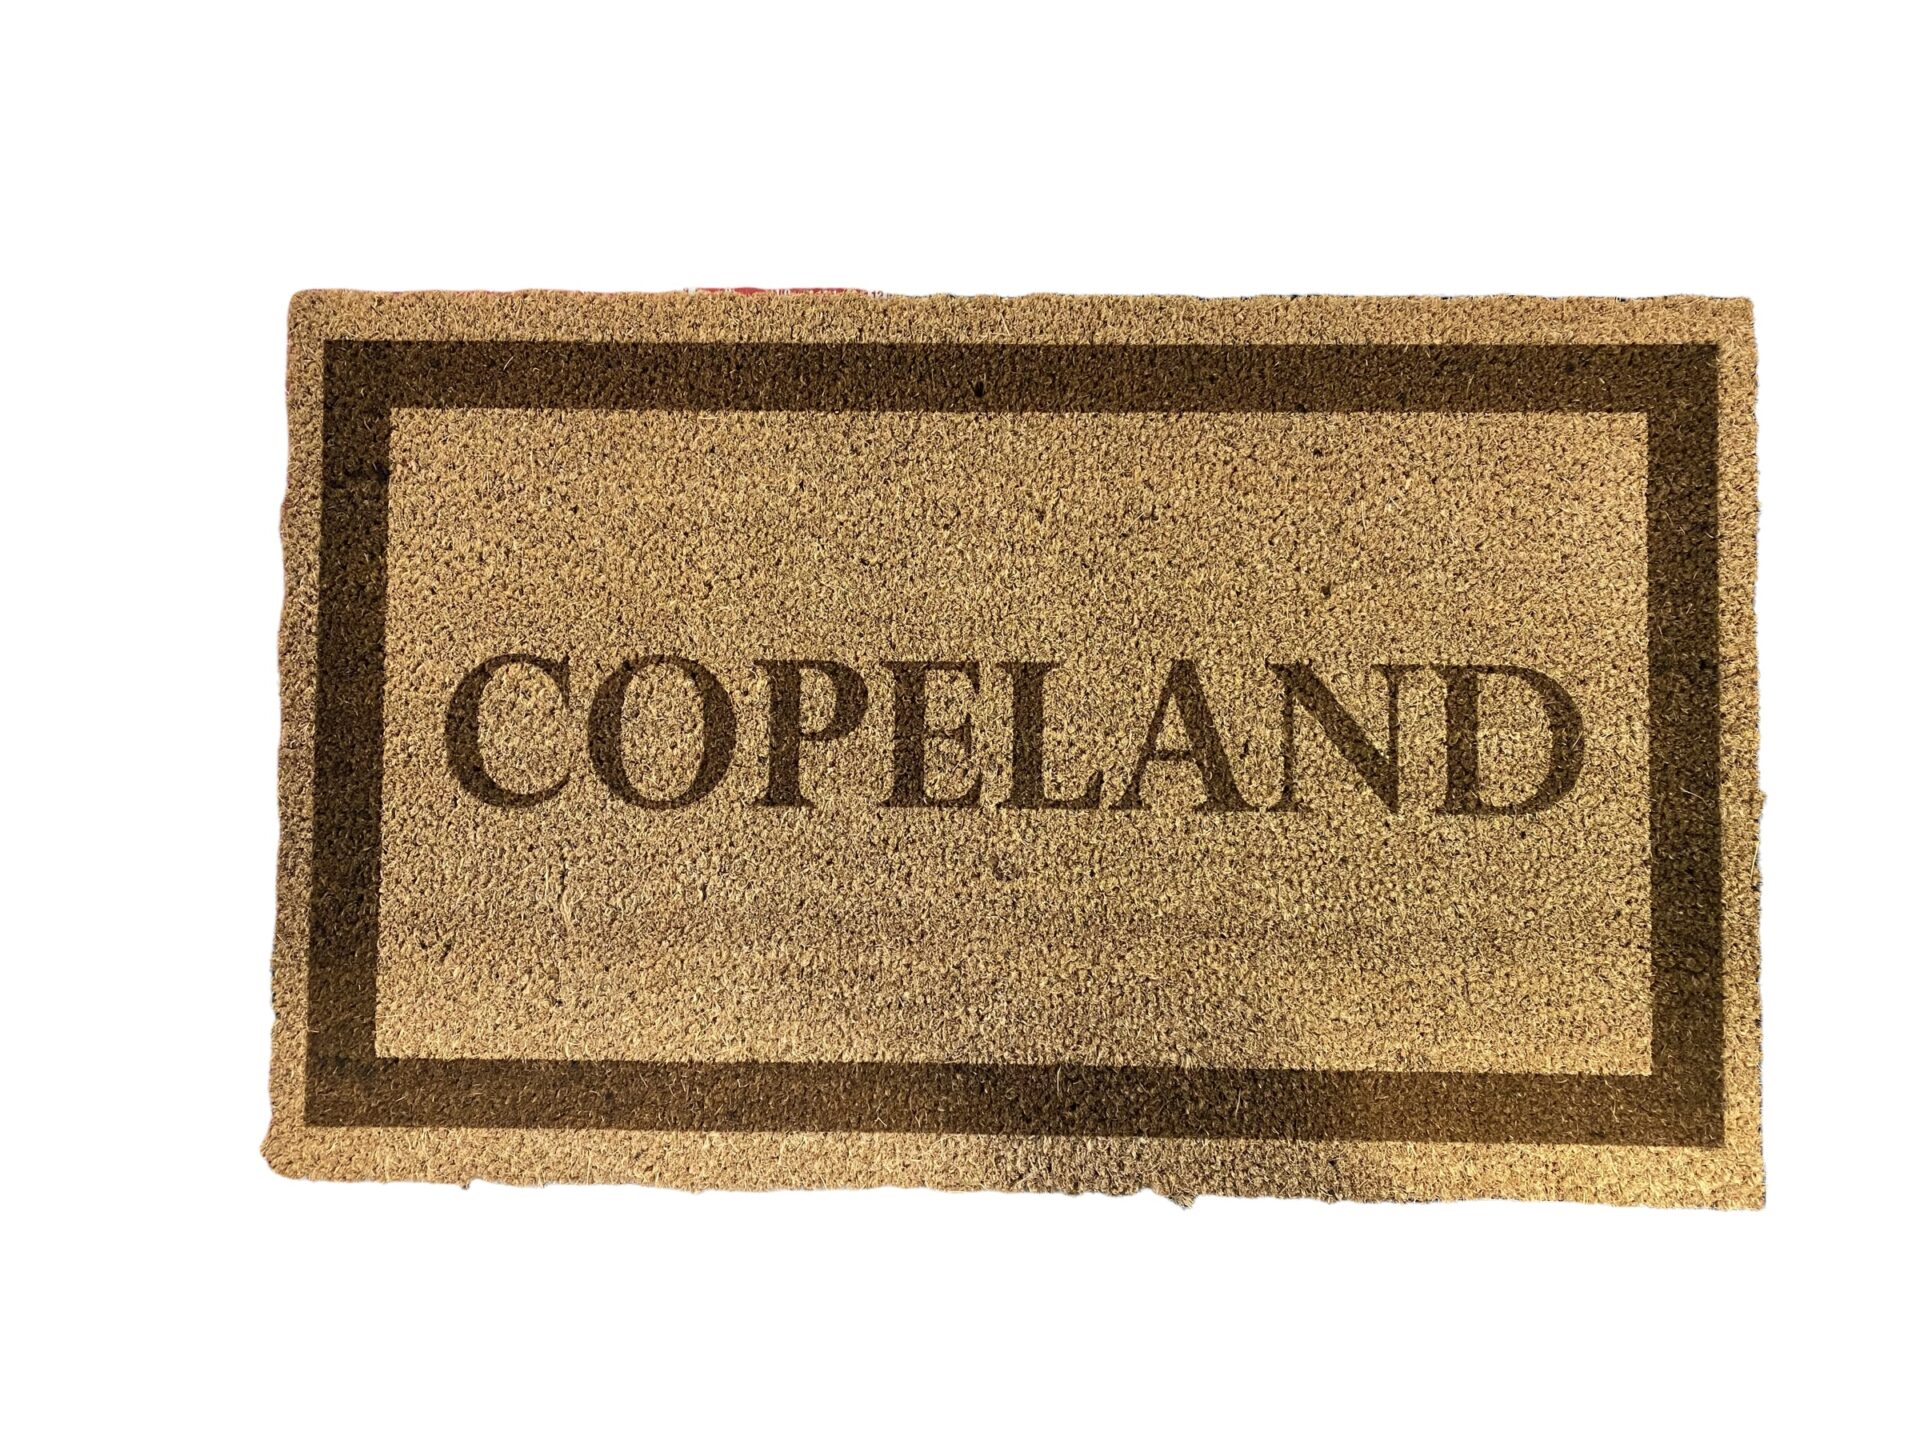 Door Mat with with Copeland printed on it